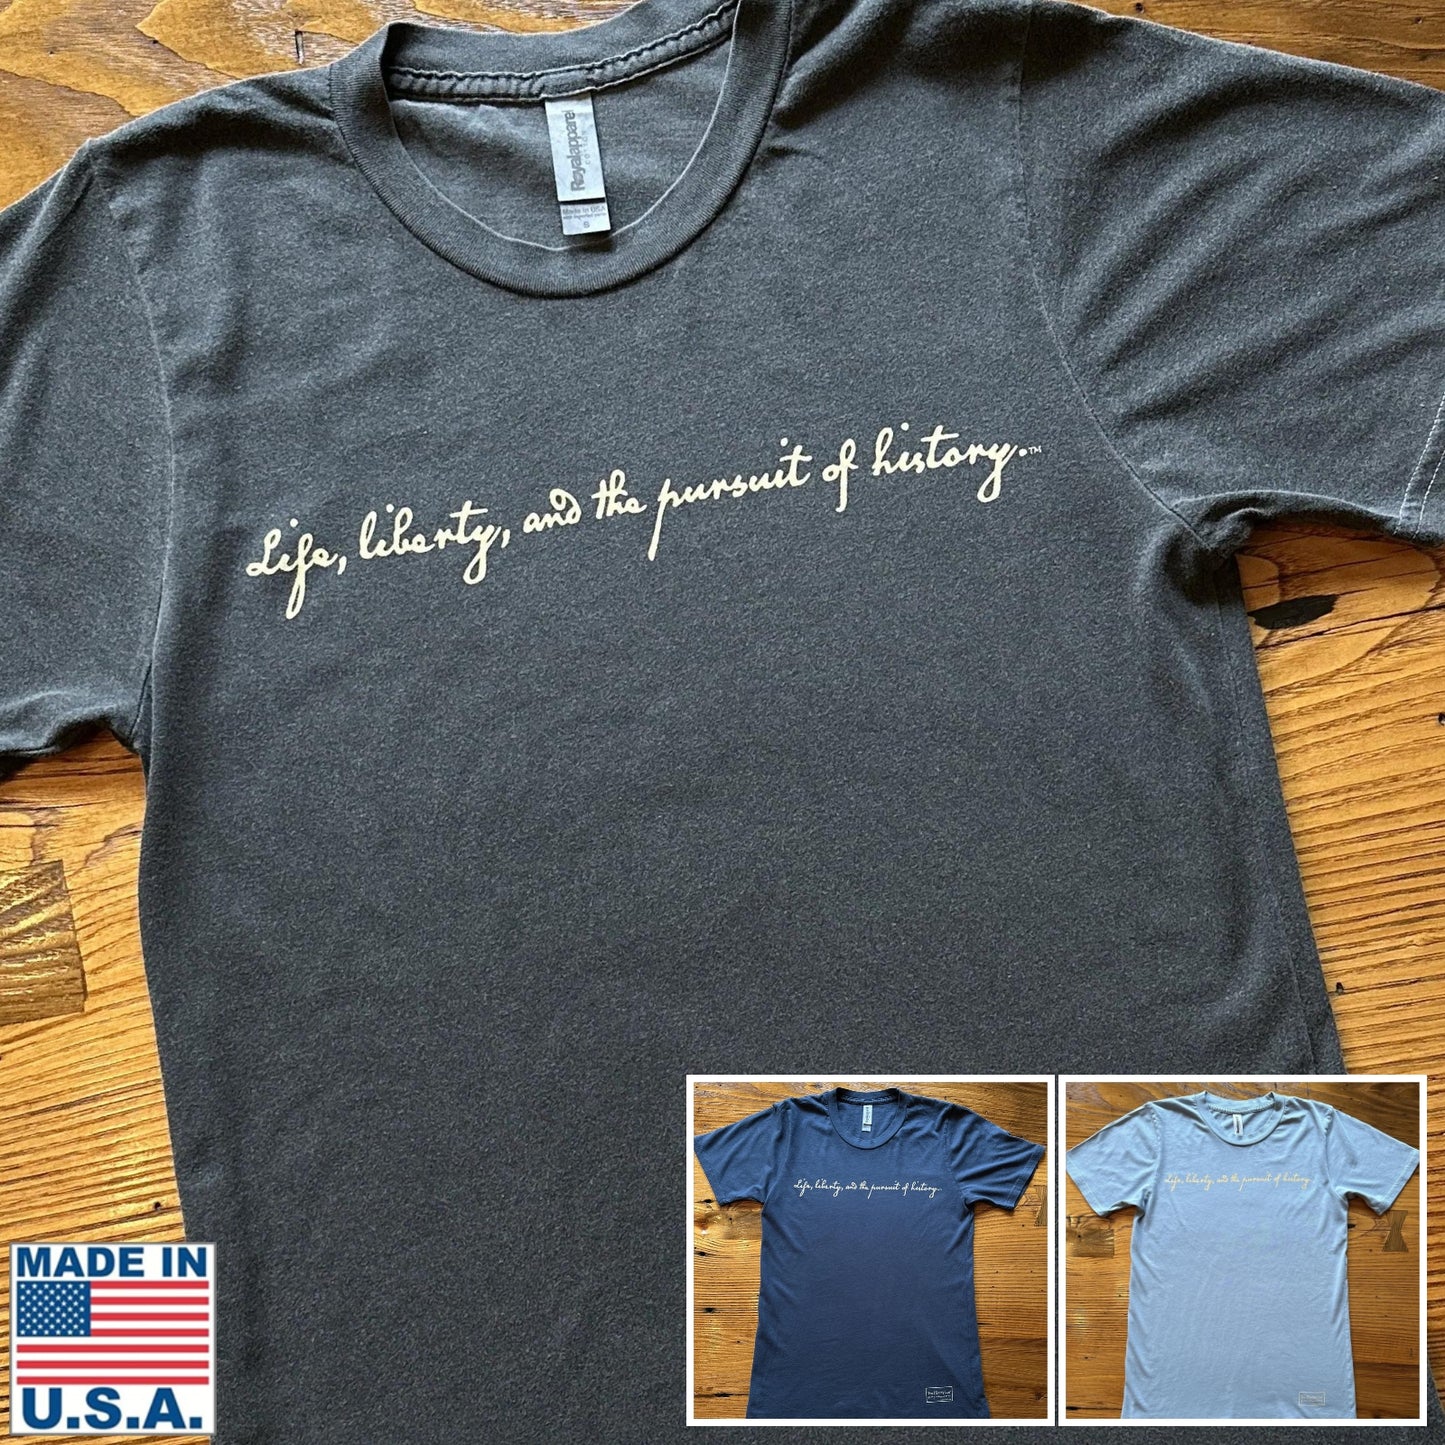 "Life, Liberty, and the Pursuit of History" Made in America Shirt